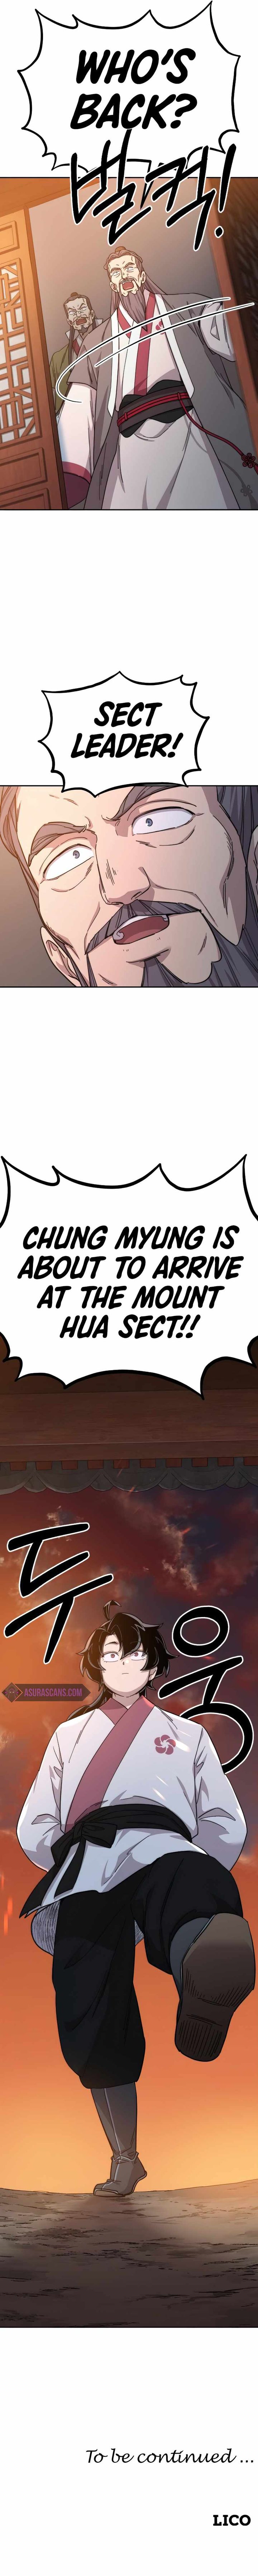 return_of_the_mount_hua_sect_32_16